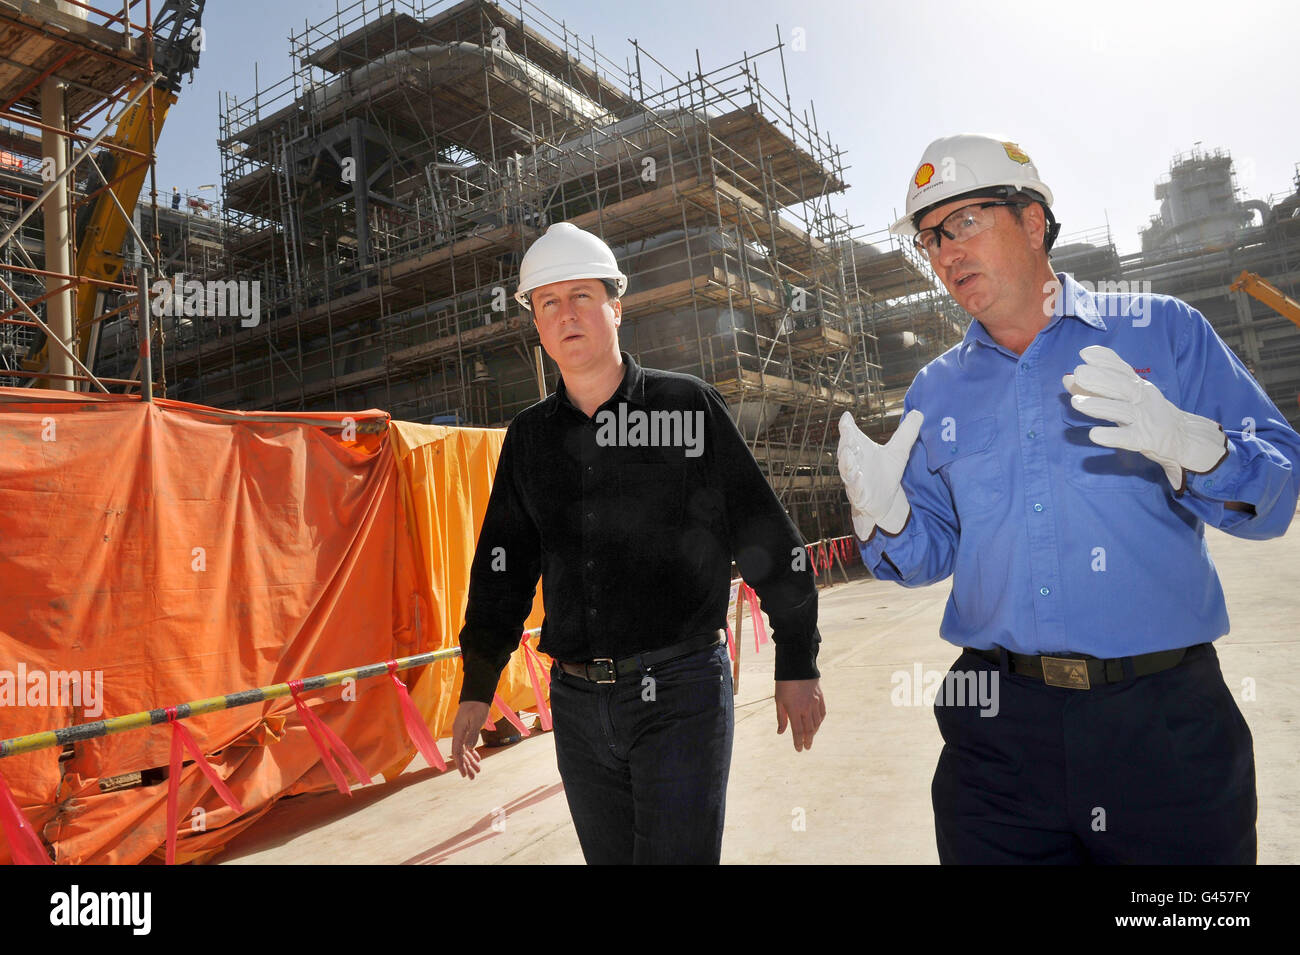 British Prime Minister David Cameron (left) visits Shell's vast new gas-to-liquid facility in Qatar, known as Pearl, with Shell executive vice president and Pearl boss Andy Brown. Stock Photo